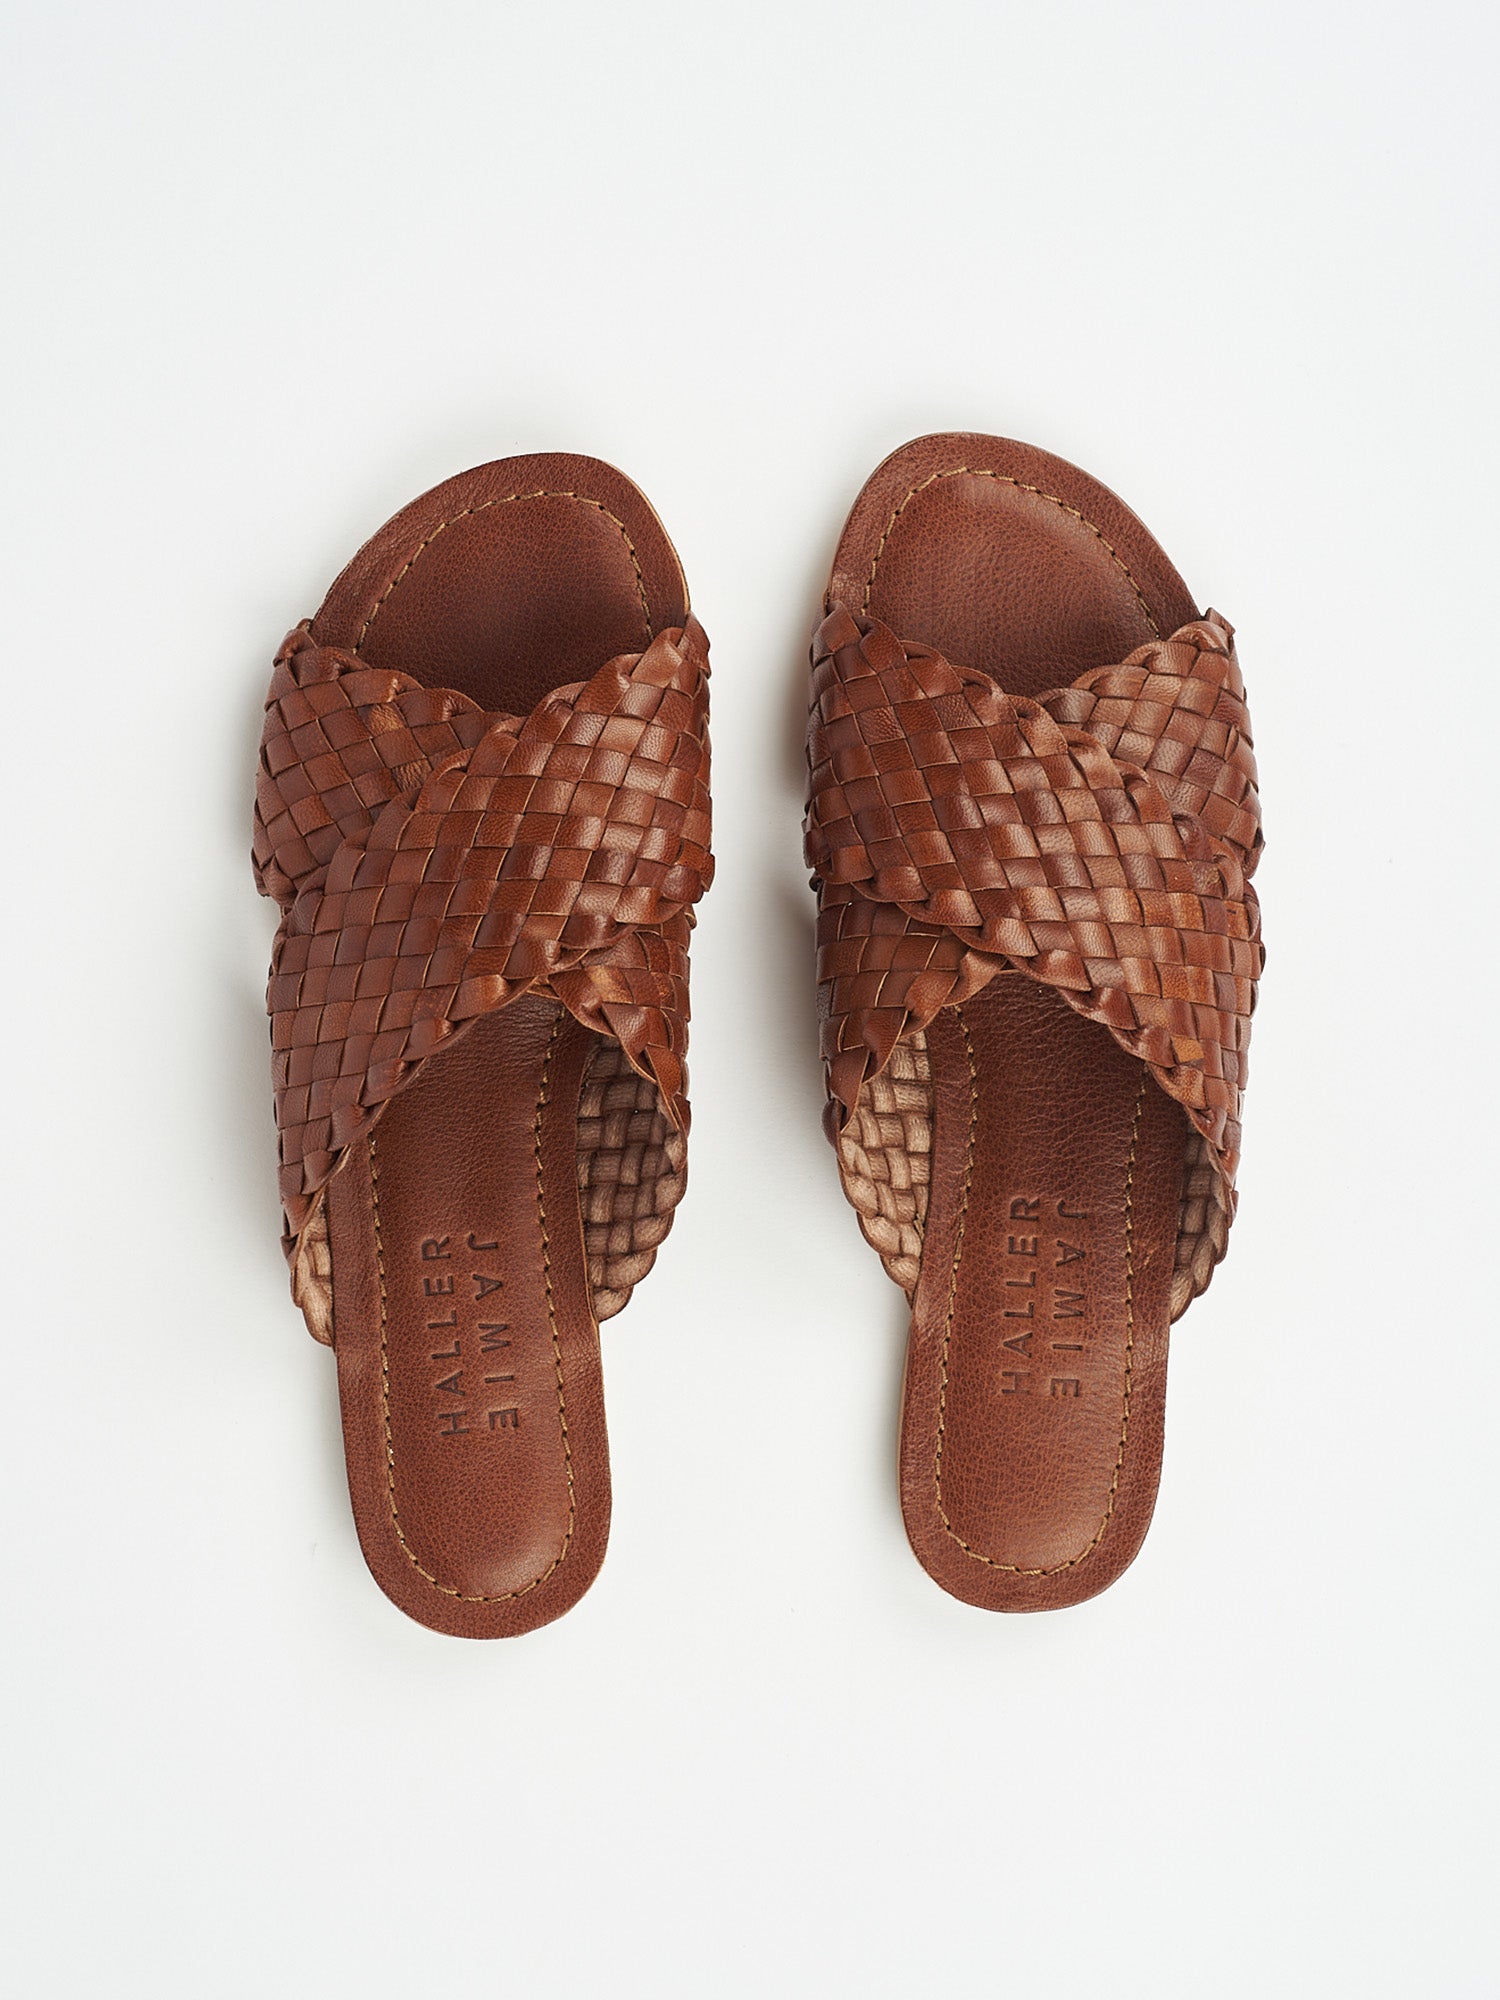 The Woven Strap Slide in Brown Flat View